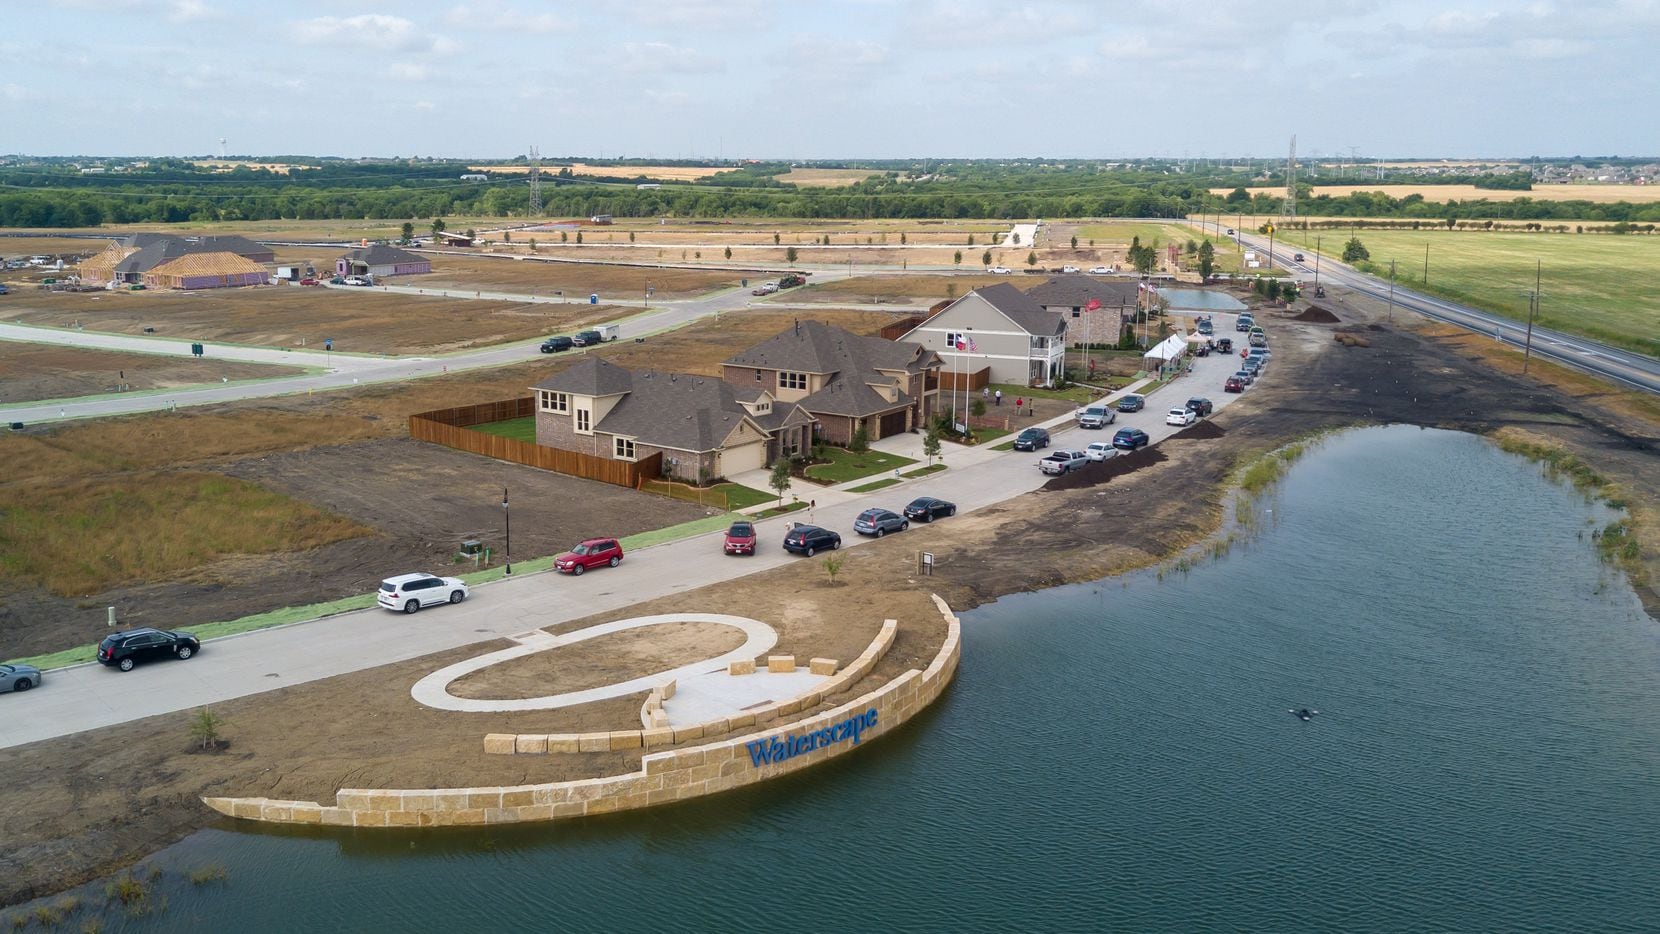 The first phase of 275 houses is under development in the Waterscape community in Royce City.